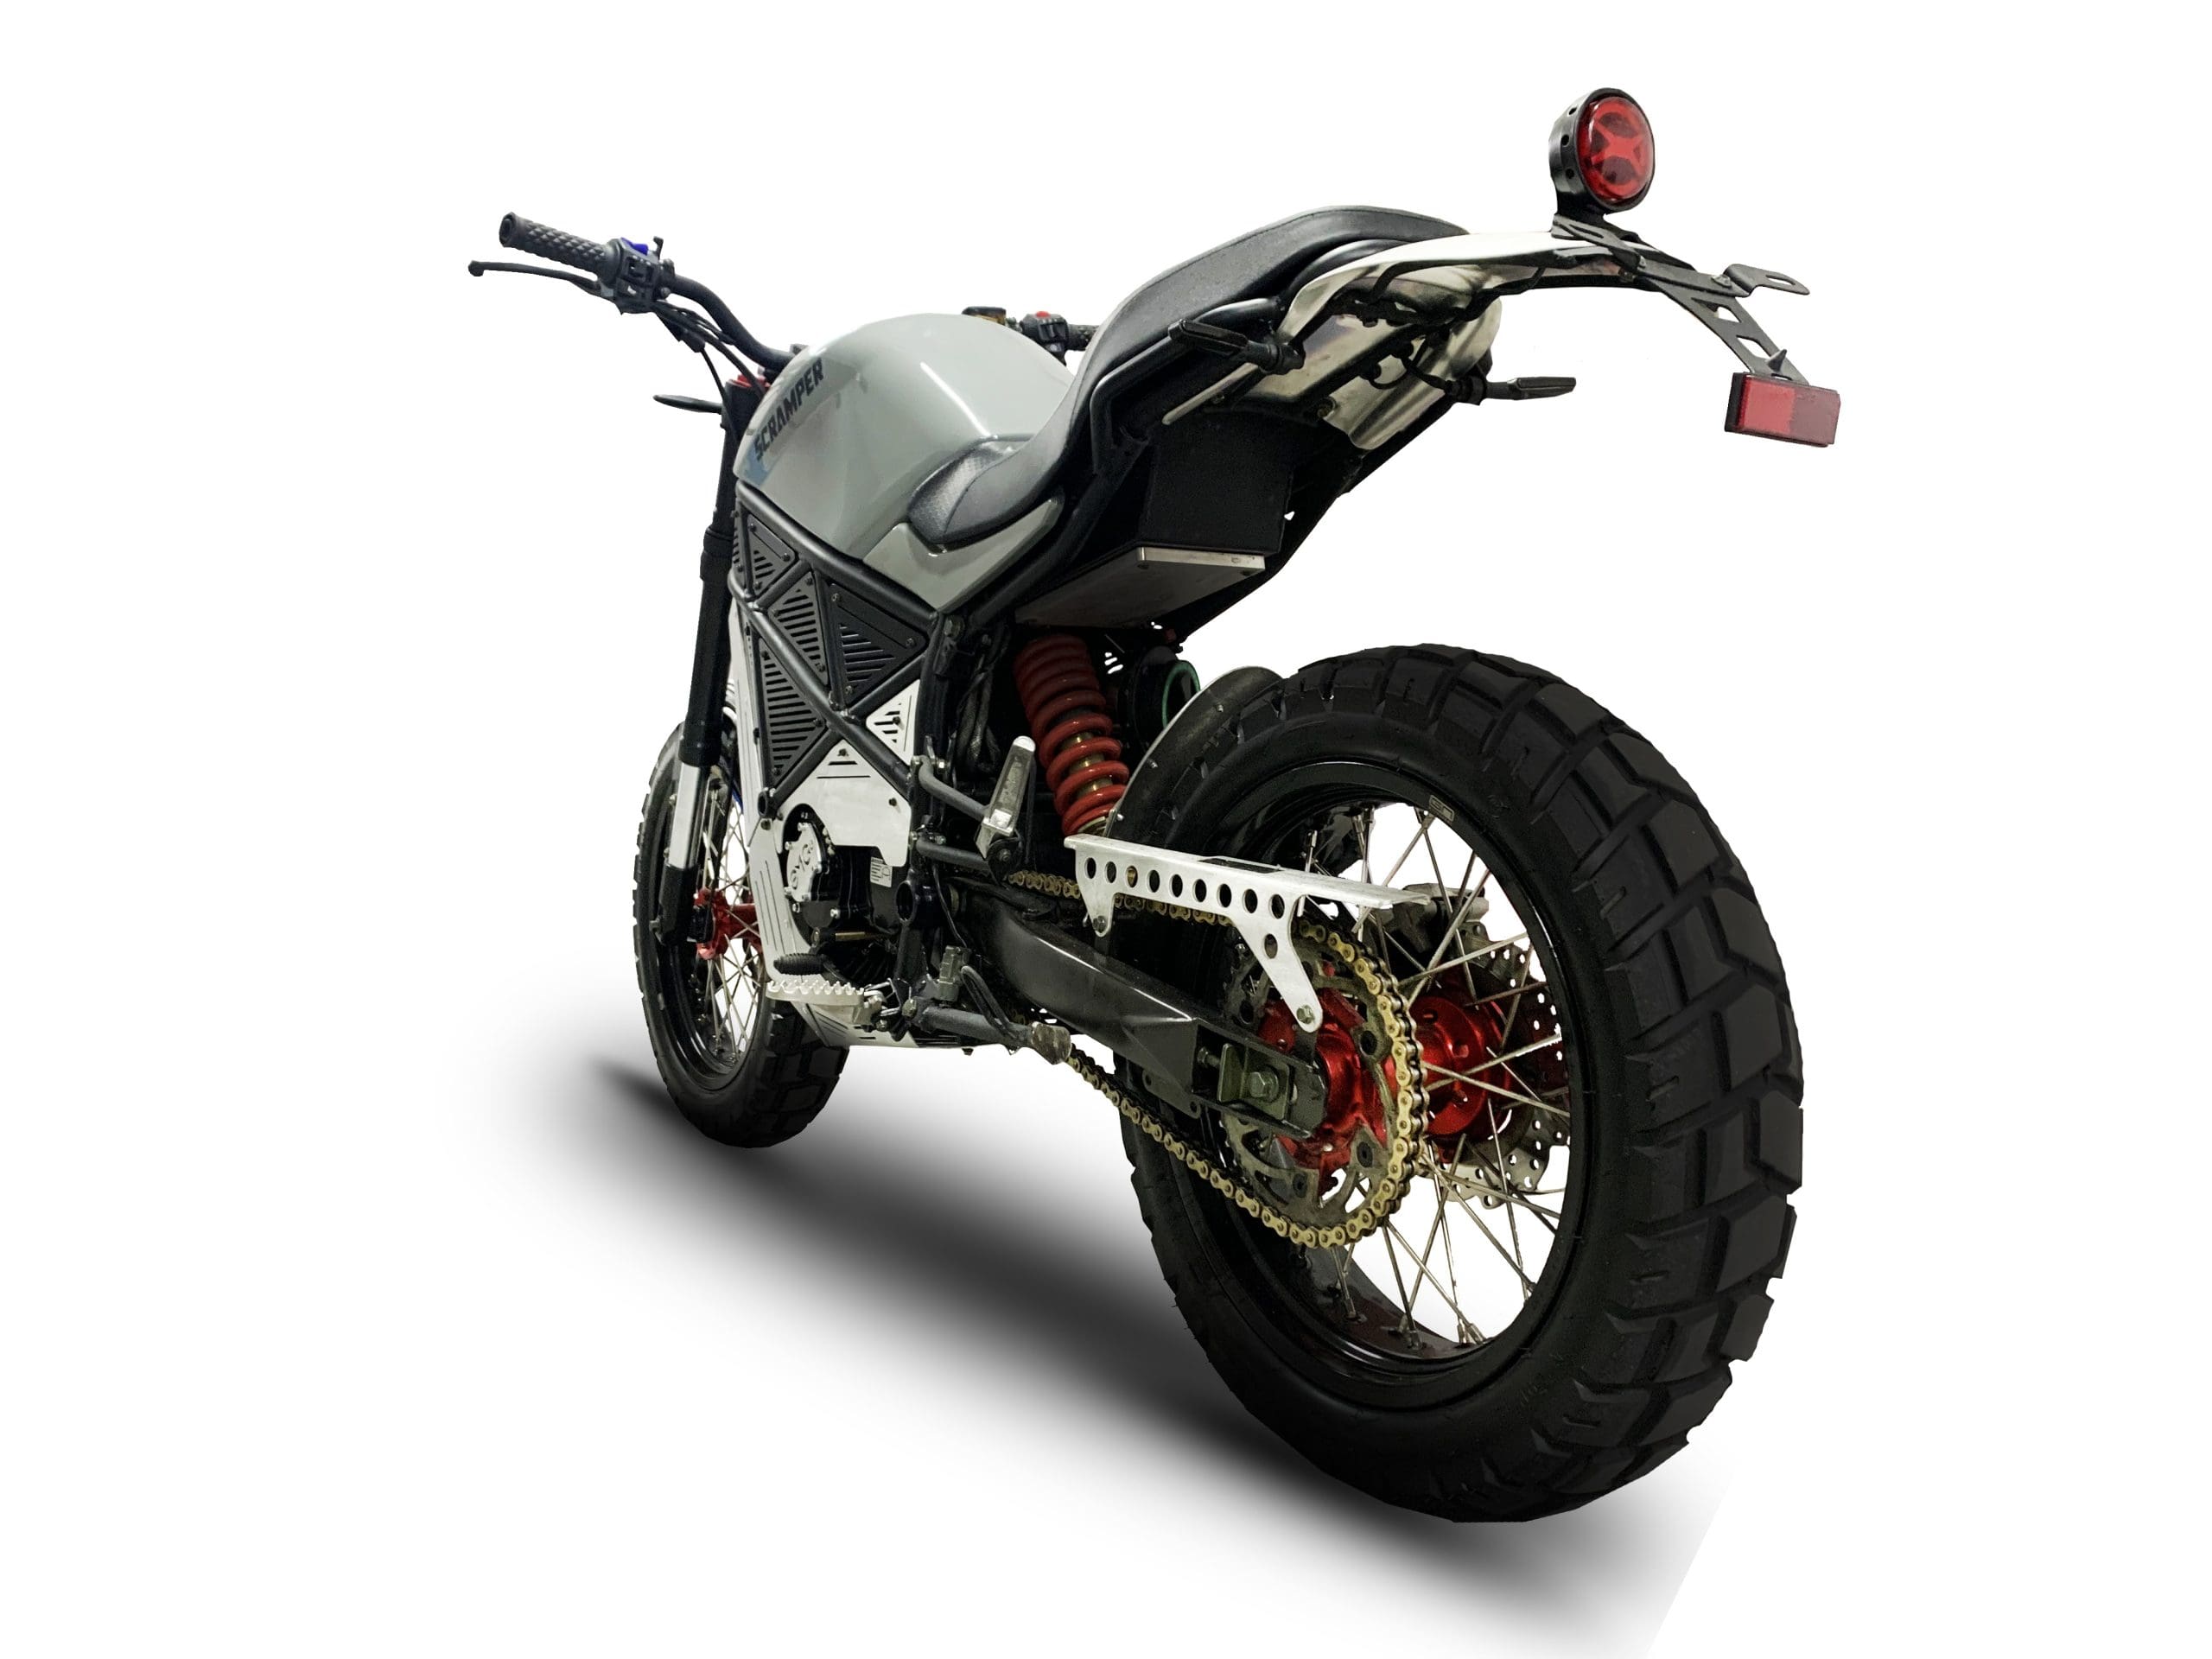 A view of the ScrAmper electric motorcycle from EmGo Technologies